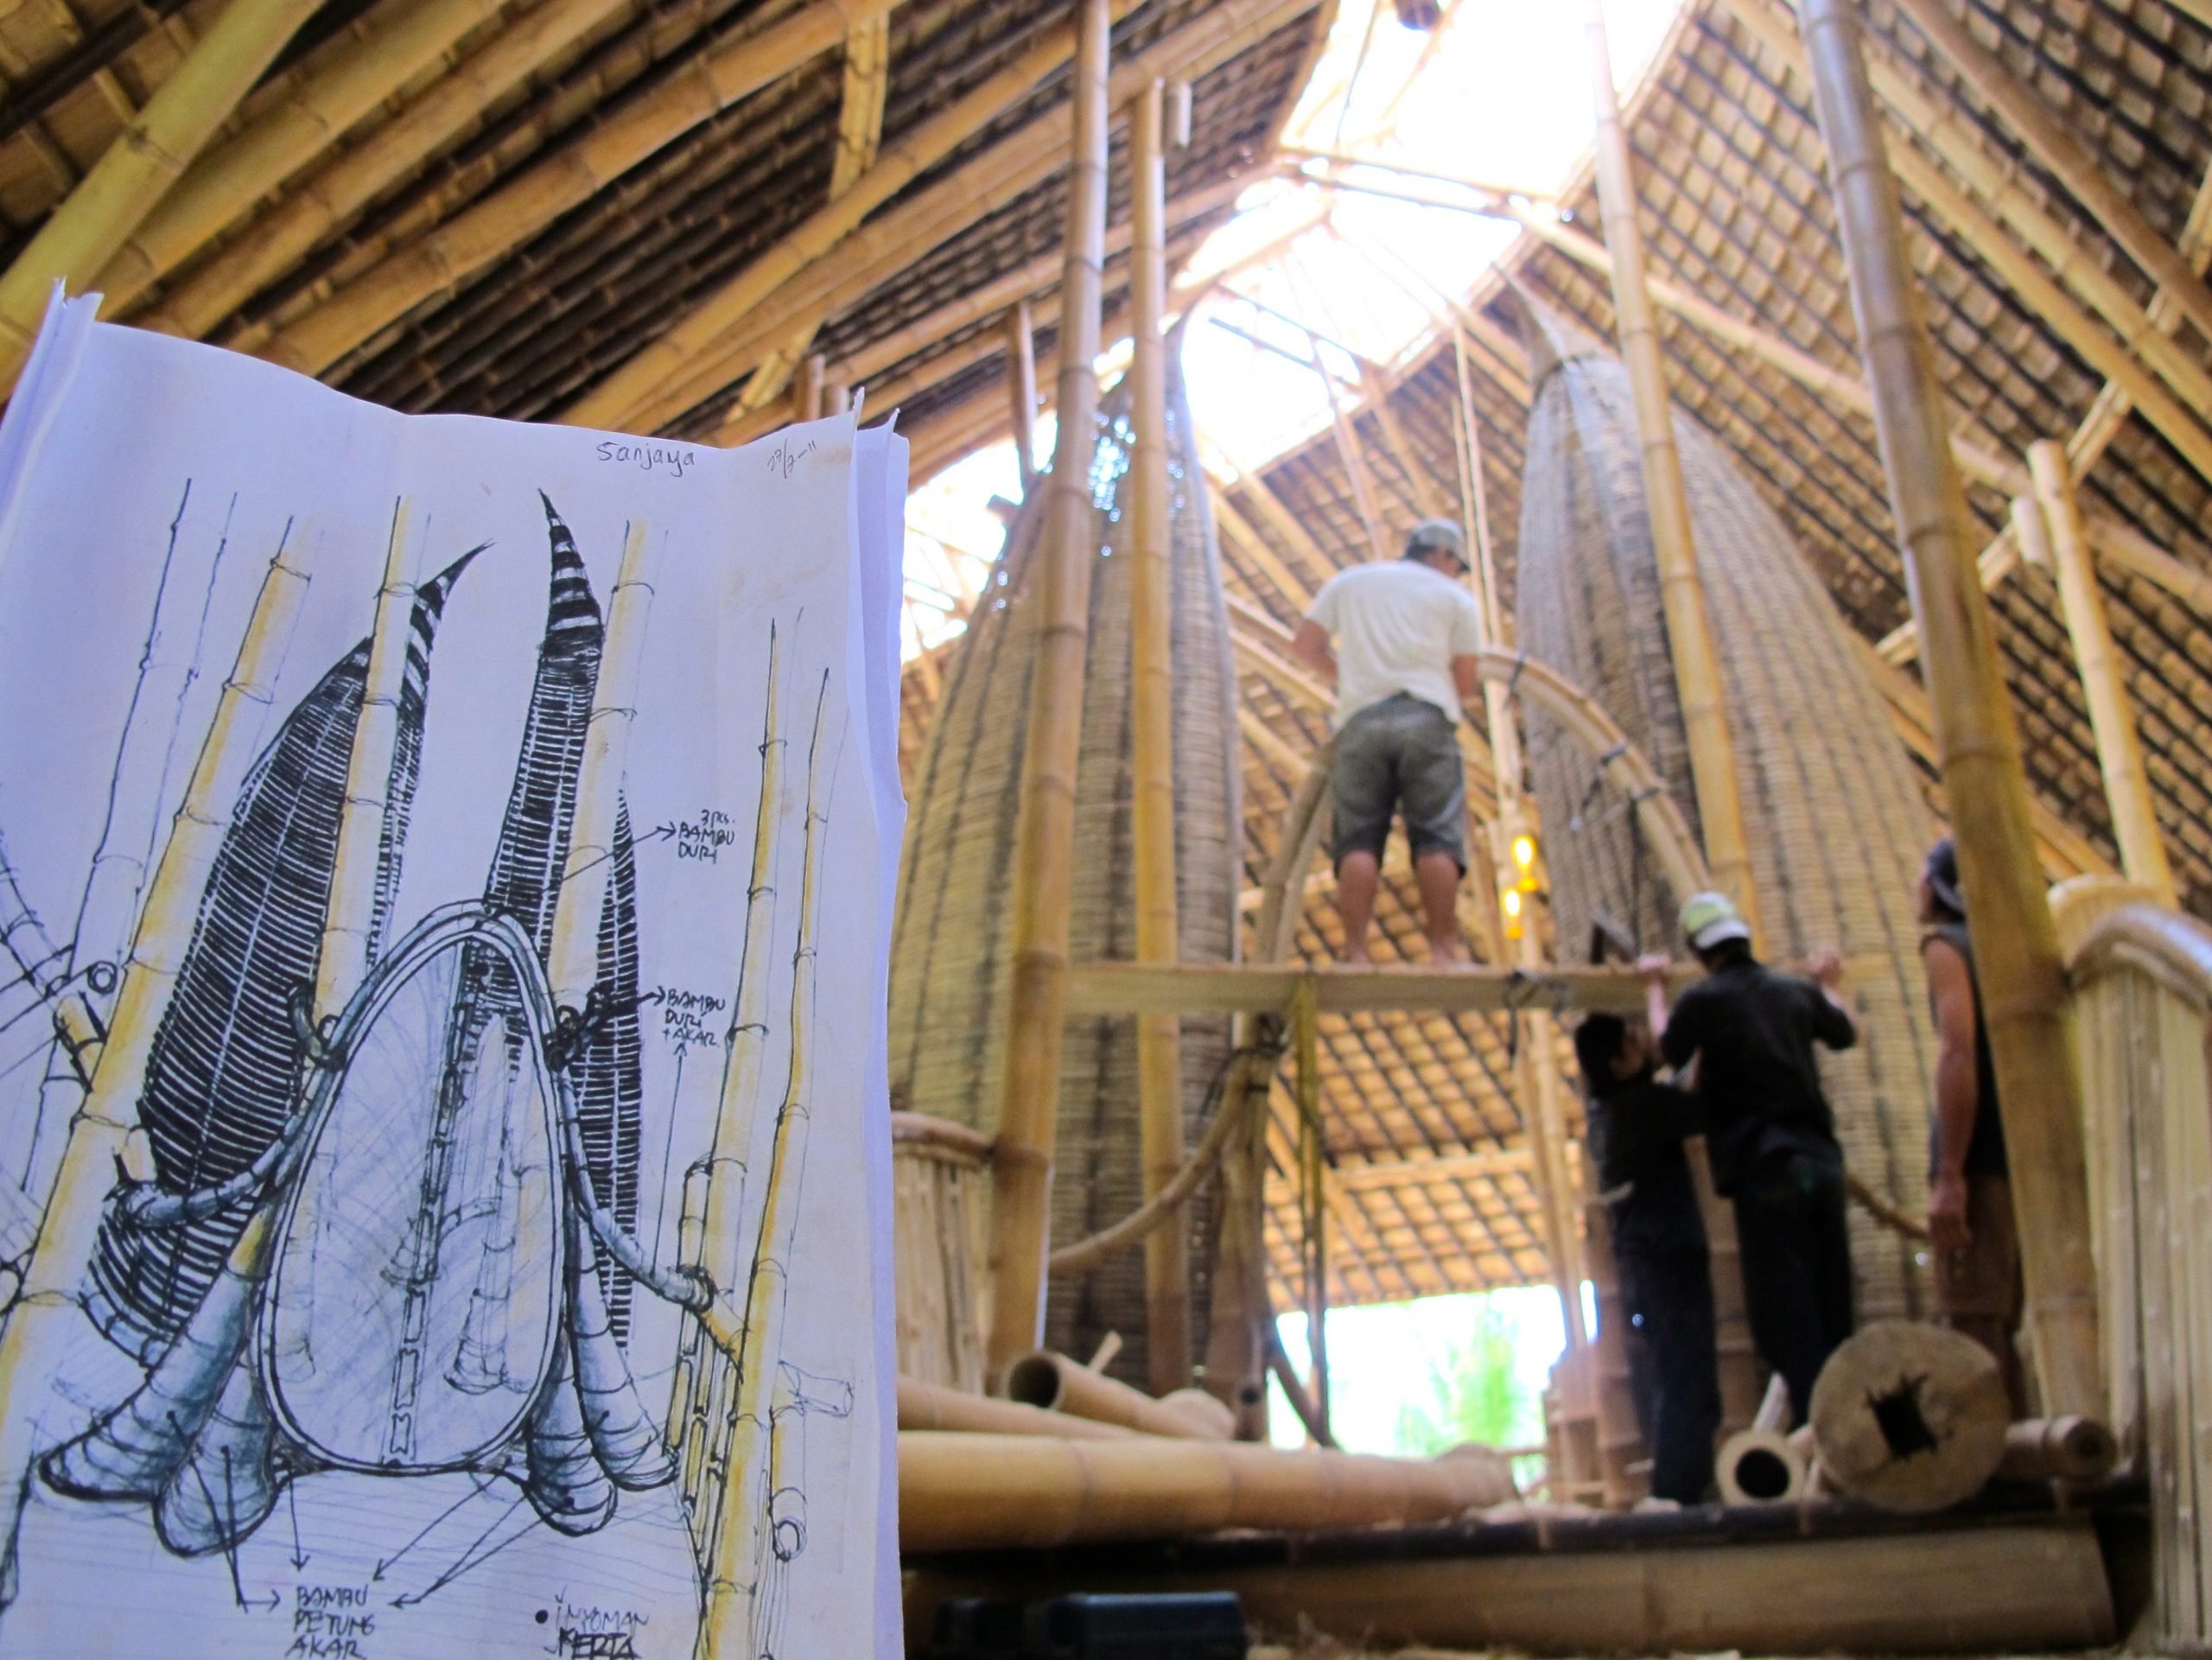 The sketch of an Ibuku home in comparison to the build process of the home